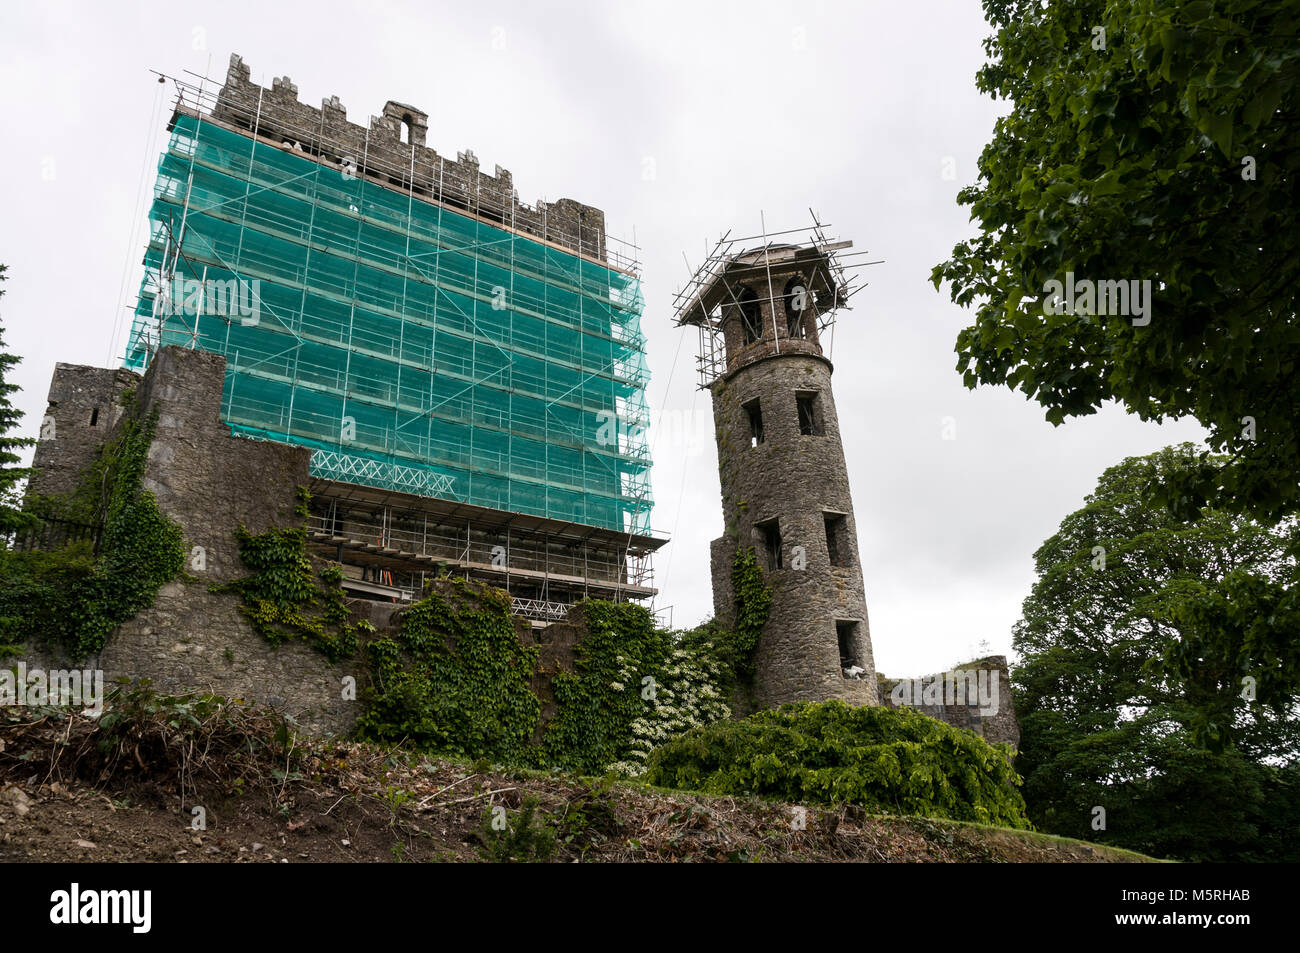 Blarney Castle covered in scaffolding during restoration work at Blarney near Cork in Southern Ireland.   Visitors climb the steps to the top of the c Stock Photo